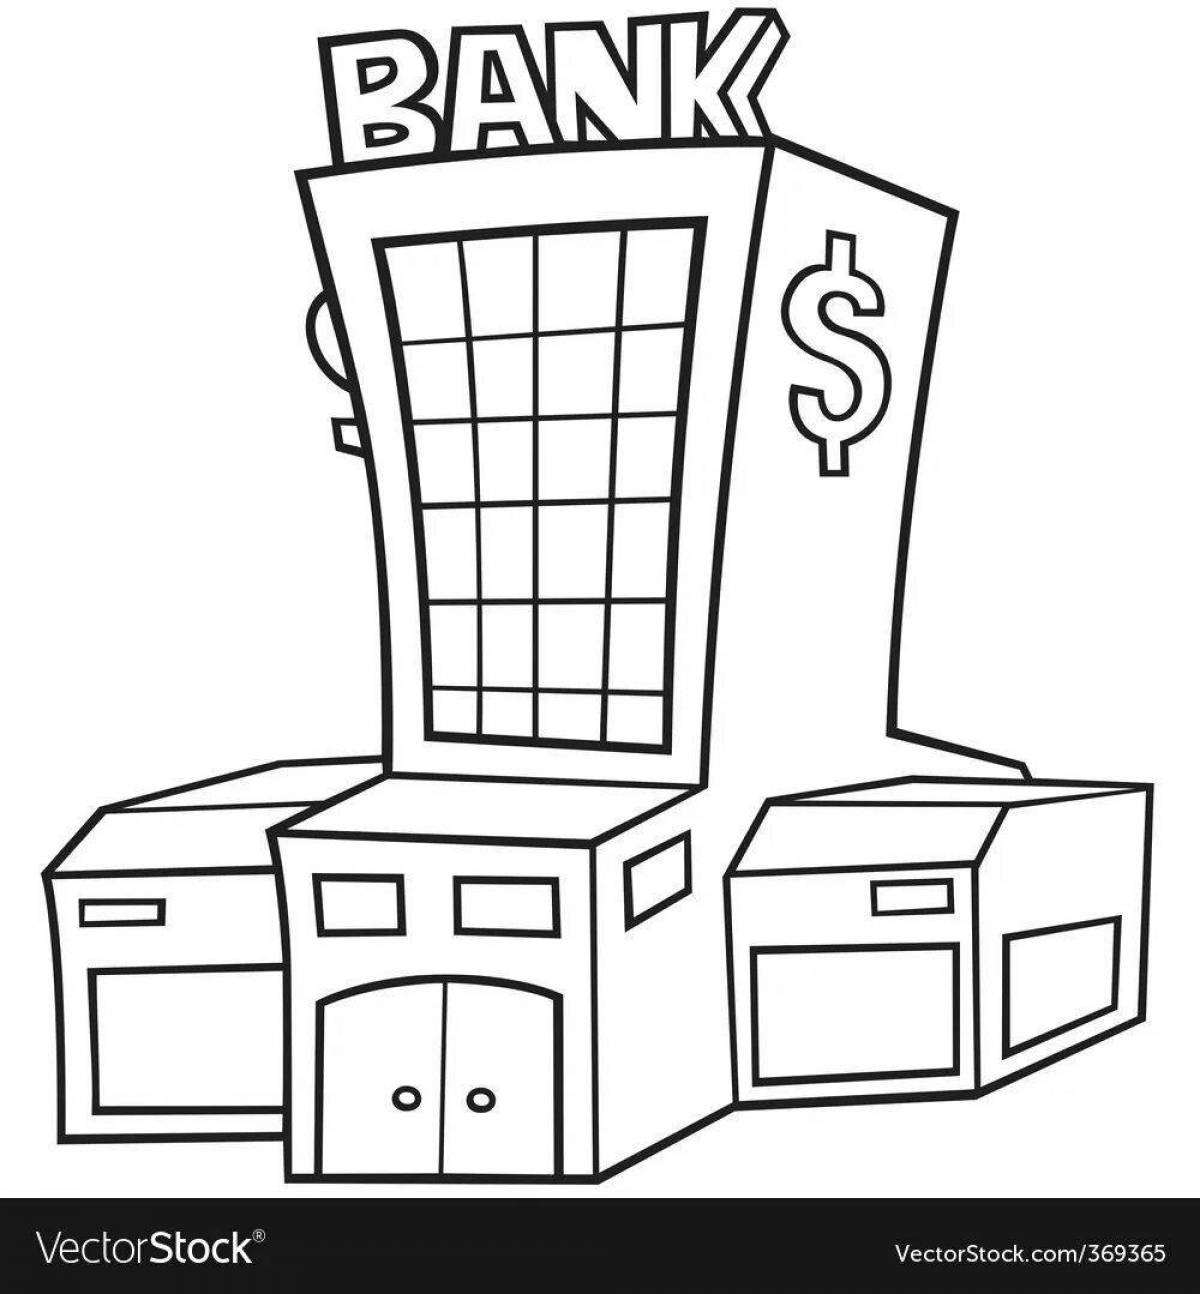 Energy bank coloring page